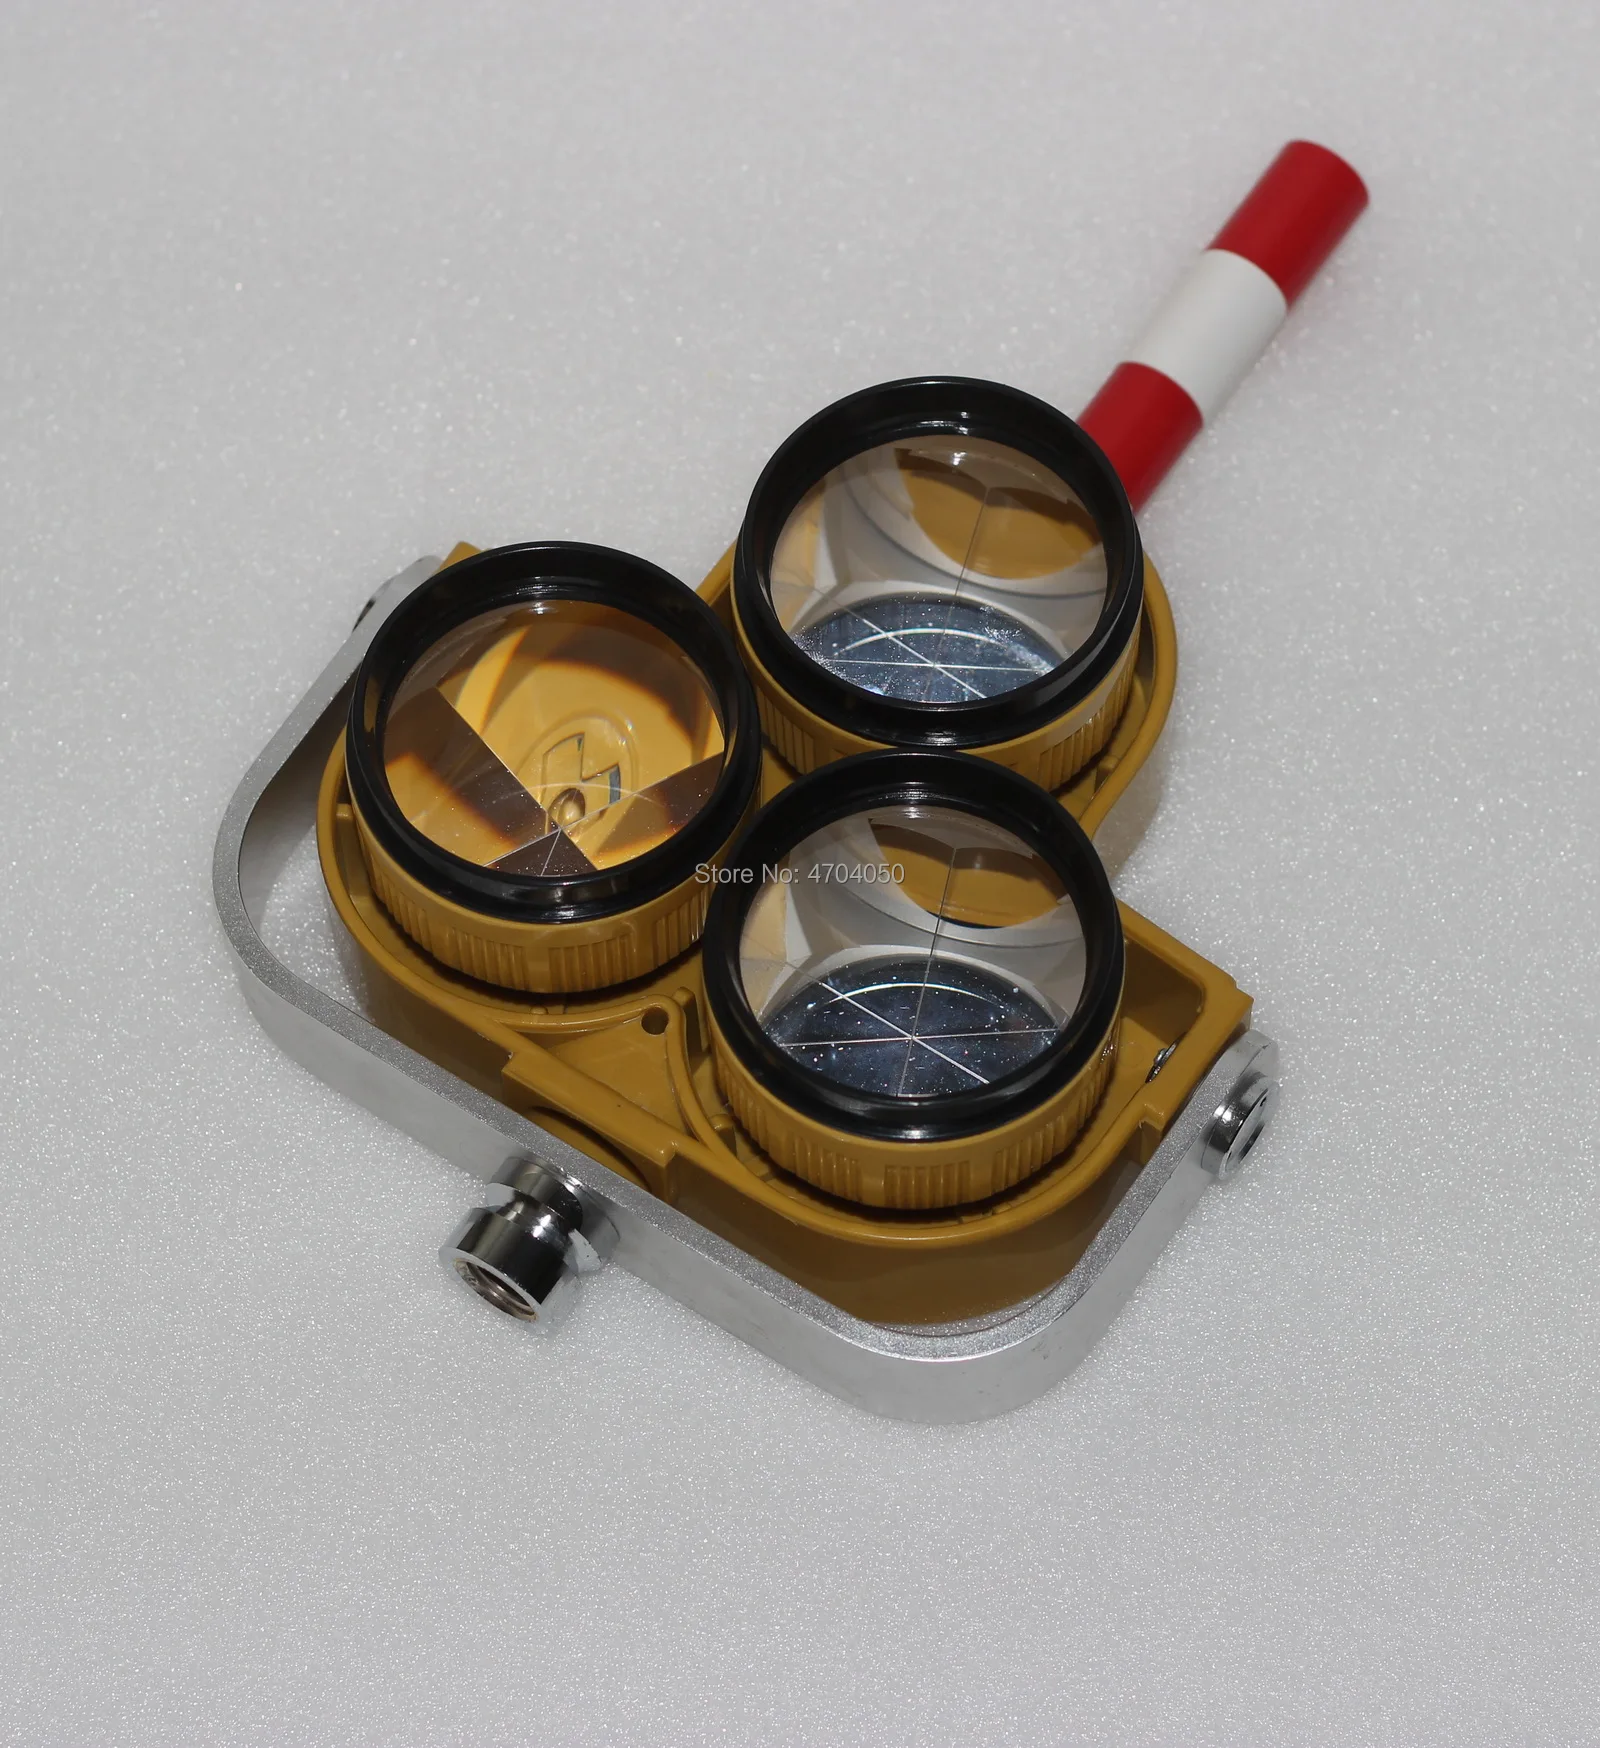 

New -30/0mm offset Yellow Triple Prism with color pole set For Topcon /Sokkia / South / Pentax / Nikon total station surveying